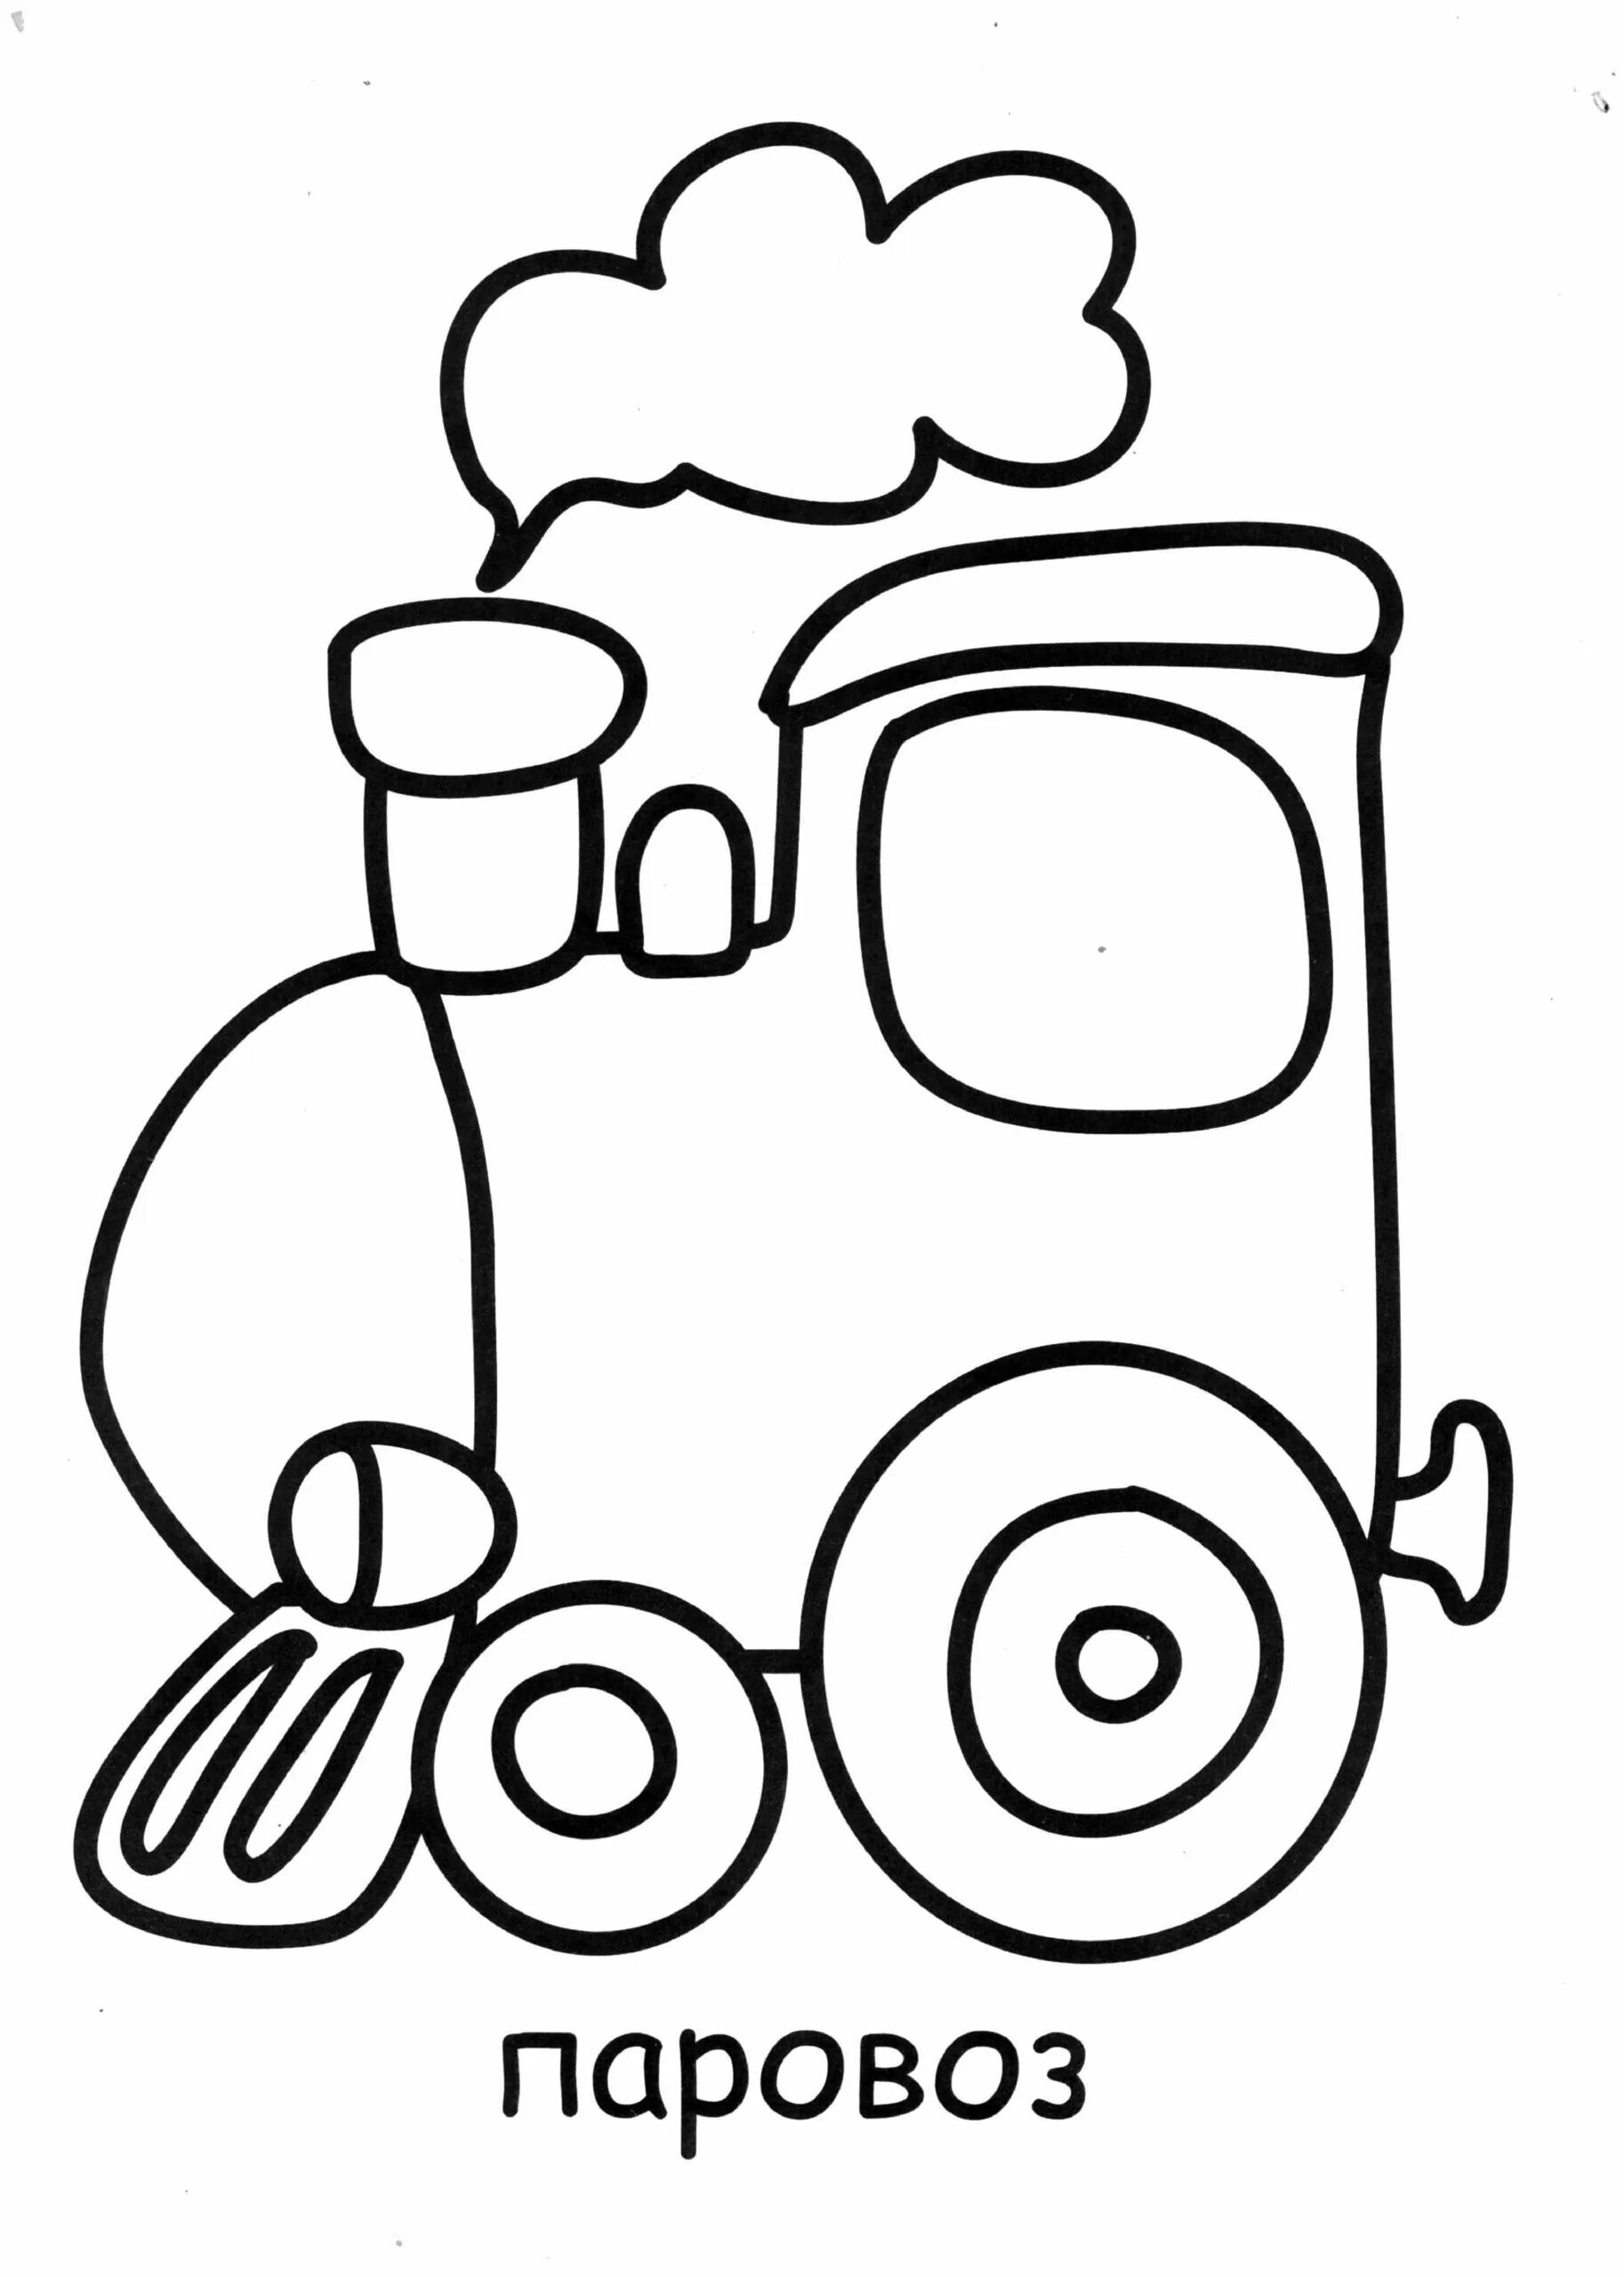 Great train coloring book for 2-3 year olds